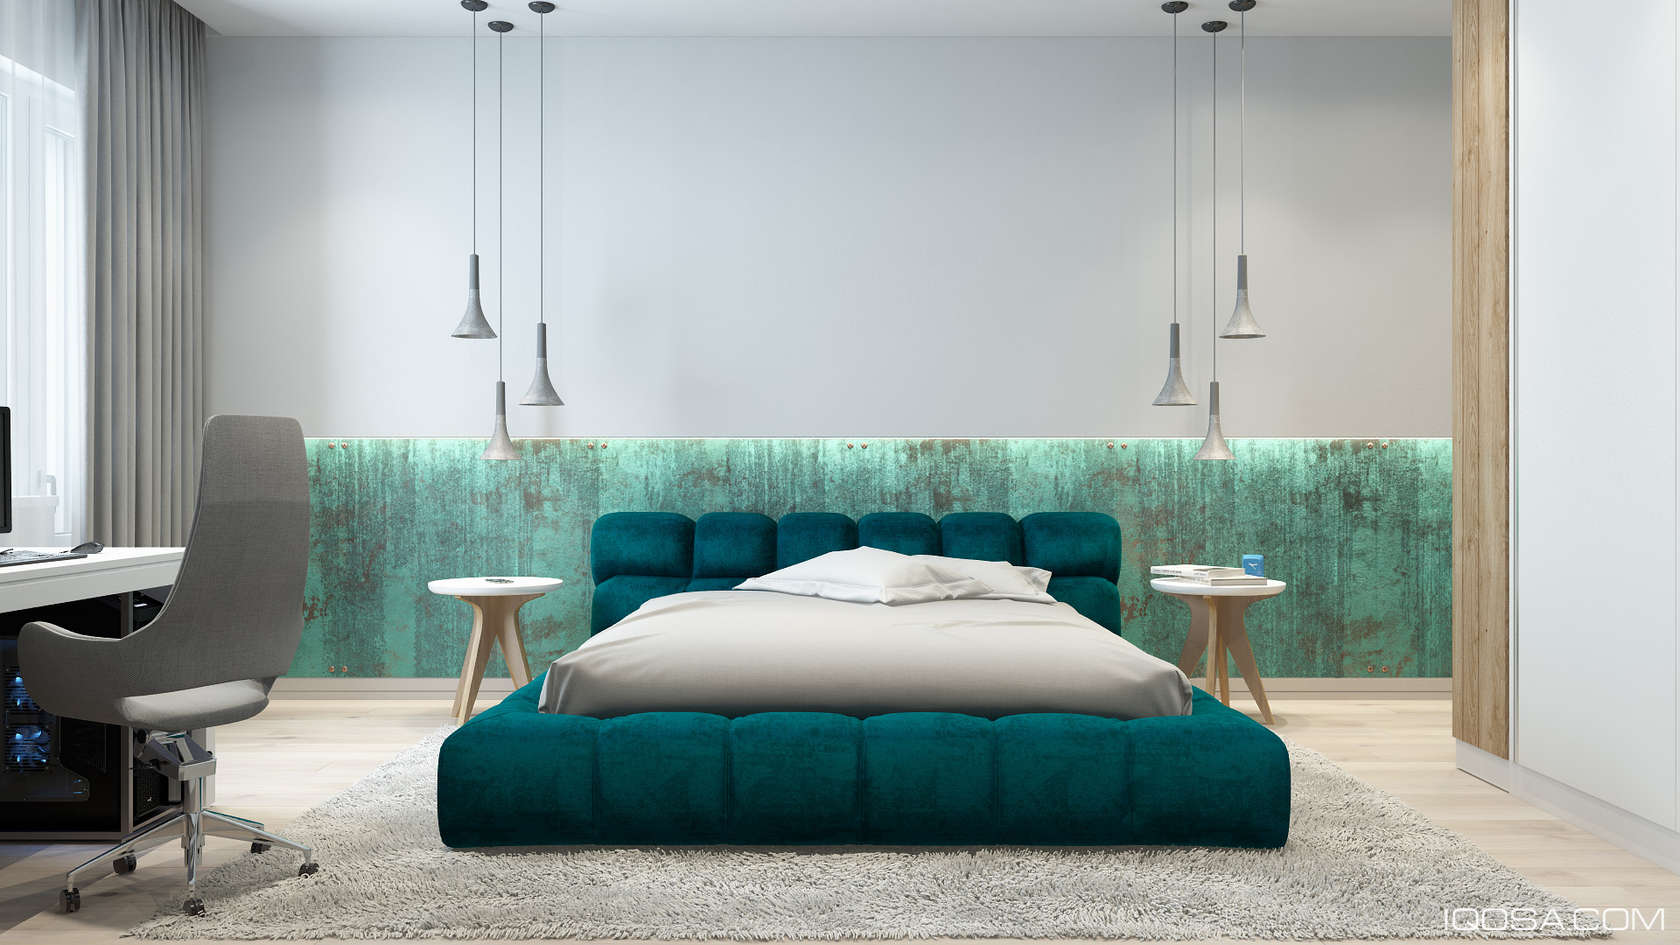 Luxury tosca bedroom "width =" 1680 "height =" 945 "srcset =" https://mileray.com/wp-content/uploads/2020/05/1588509628_642_Luxury-Bedroom-Design-Ideas-With-a-Awesome-Wall-Decoration-Will.jpg 1680w, https://mileray.com/wp- content / uploads / 2016/09 / Iqosa1-300x169.jpg 300w, https://mileray.com/wp-content/uploads/2016/09/Iqosa1-768x432.jpg 768w, https://mileray.com/wp- content / uploads / 2016/09 / Iqosa1-1024x576.jpg 1024w, https://mileray.com/wp-content/uploads/2016/09/Iqosa1-696x392.jpg 696w, https://mileray.com/wp- content / uploads / 2016/09 / Iqosa1-1068x601.jpg 1068w, https://mileray.com/wp-content/uploads/2016/09/Iqosa1-747x420.jpg 747w "sizes =" (maximum width: 1680px) 100vw , 1680px